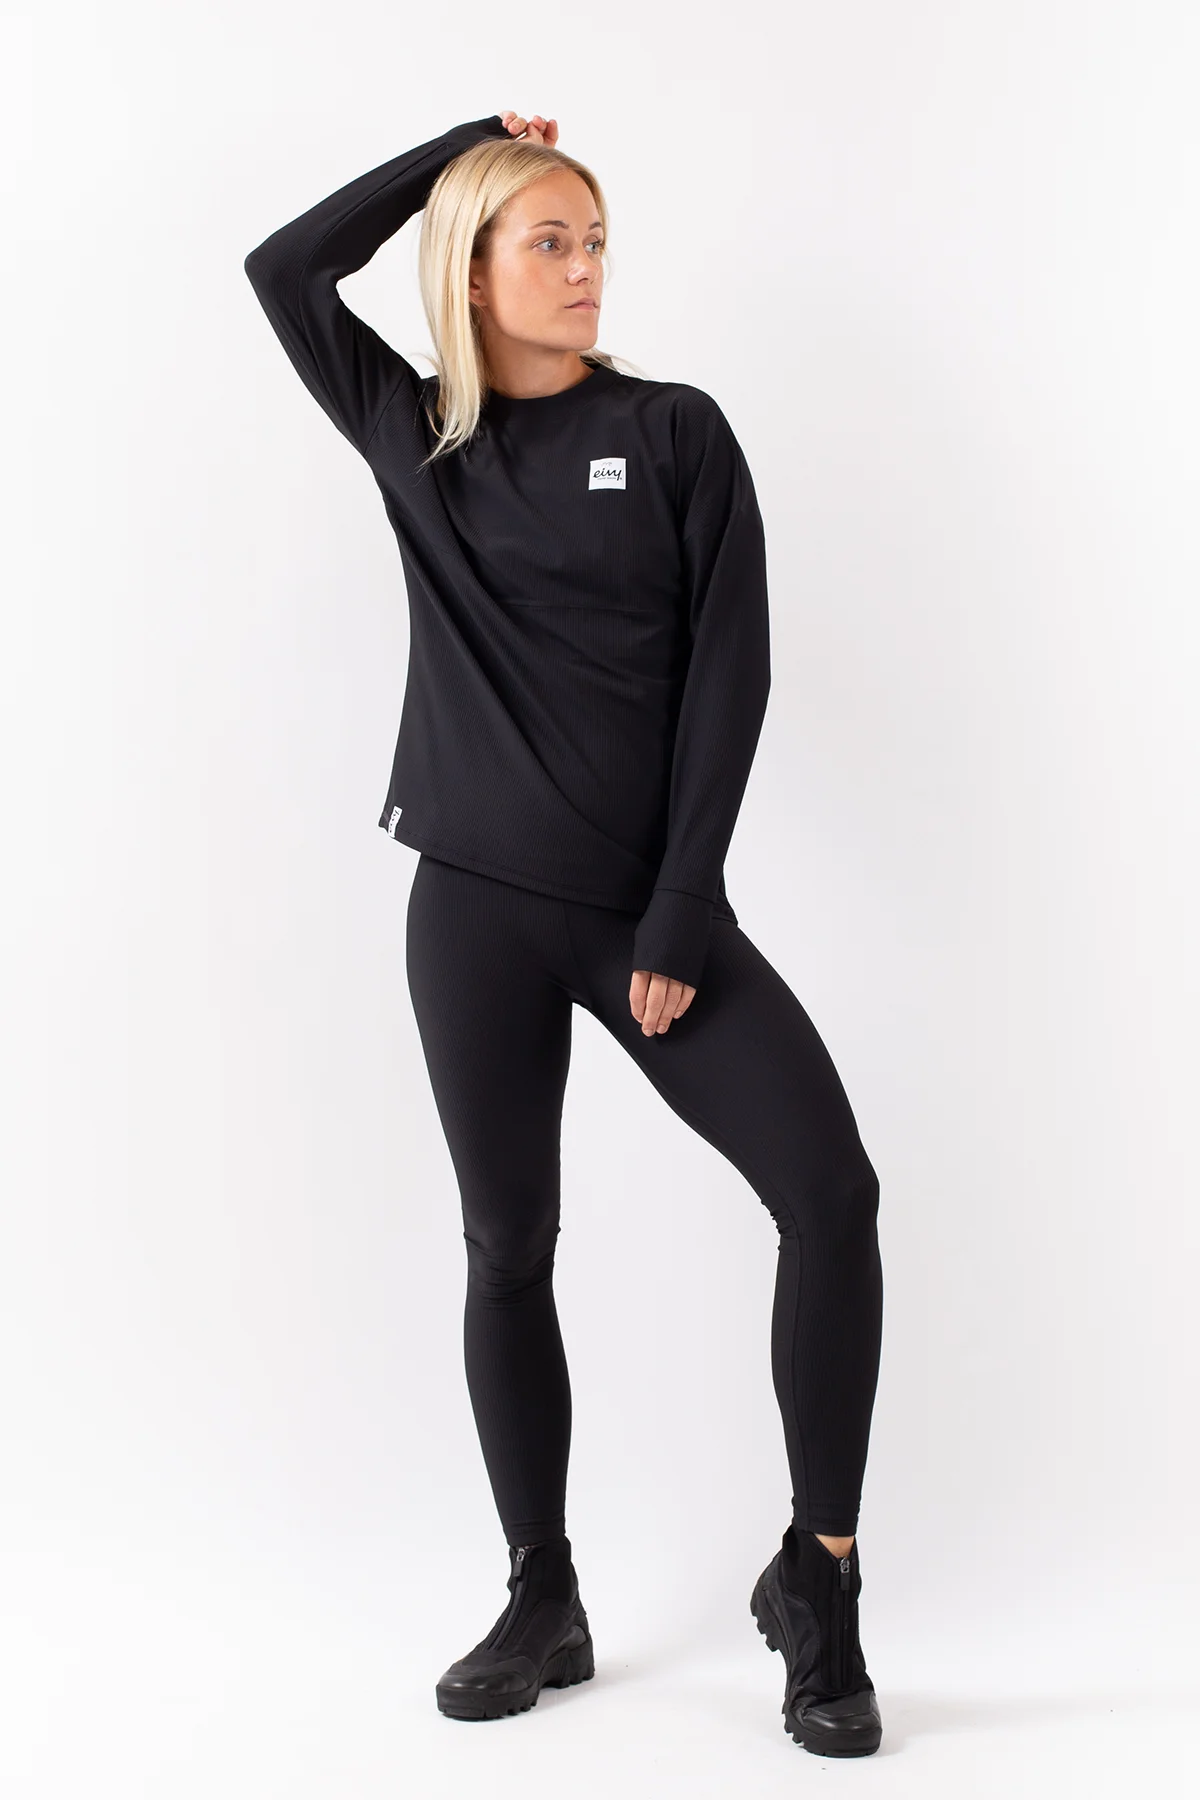 Base Layer Women - Ski and snowboard Base Layers from Eivy Clothing